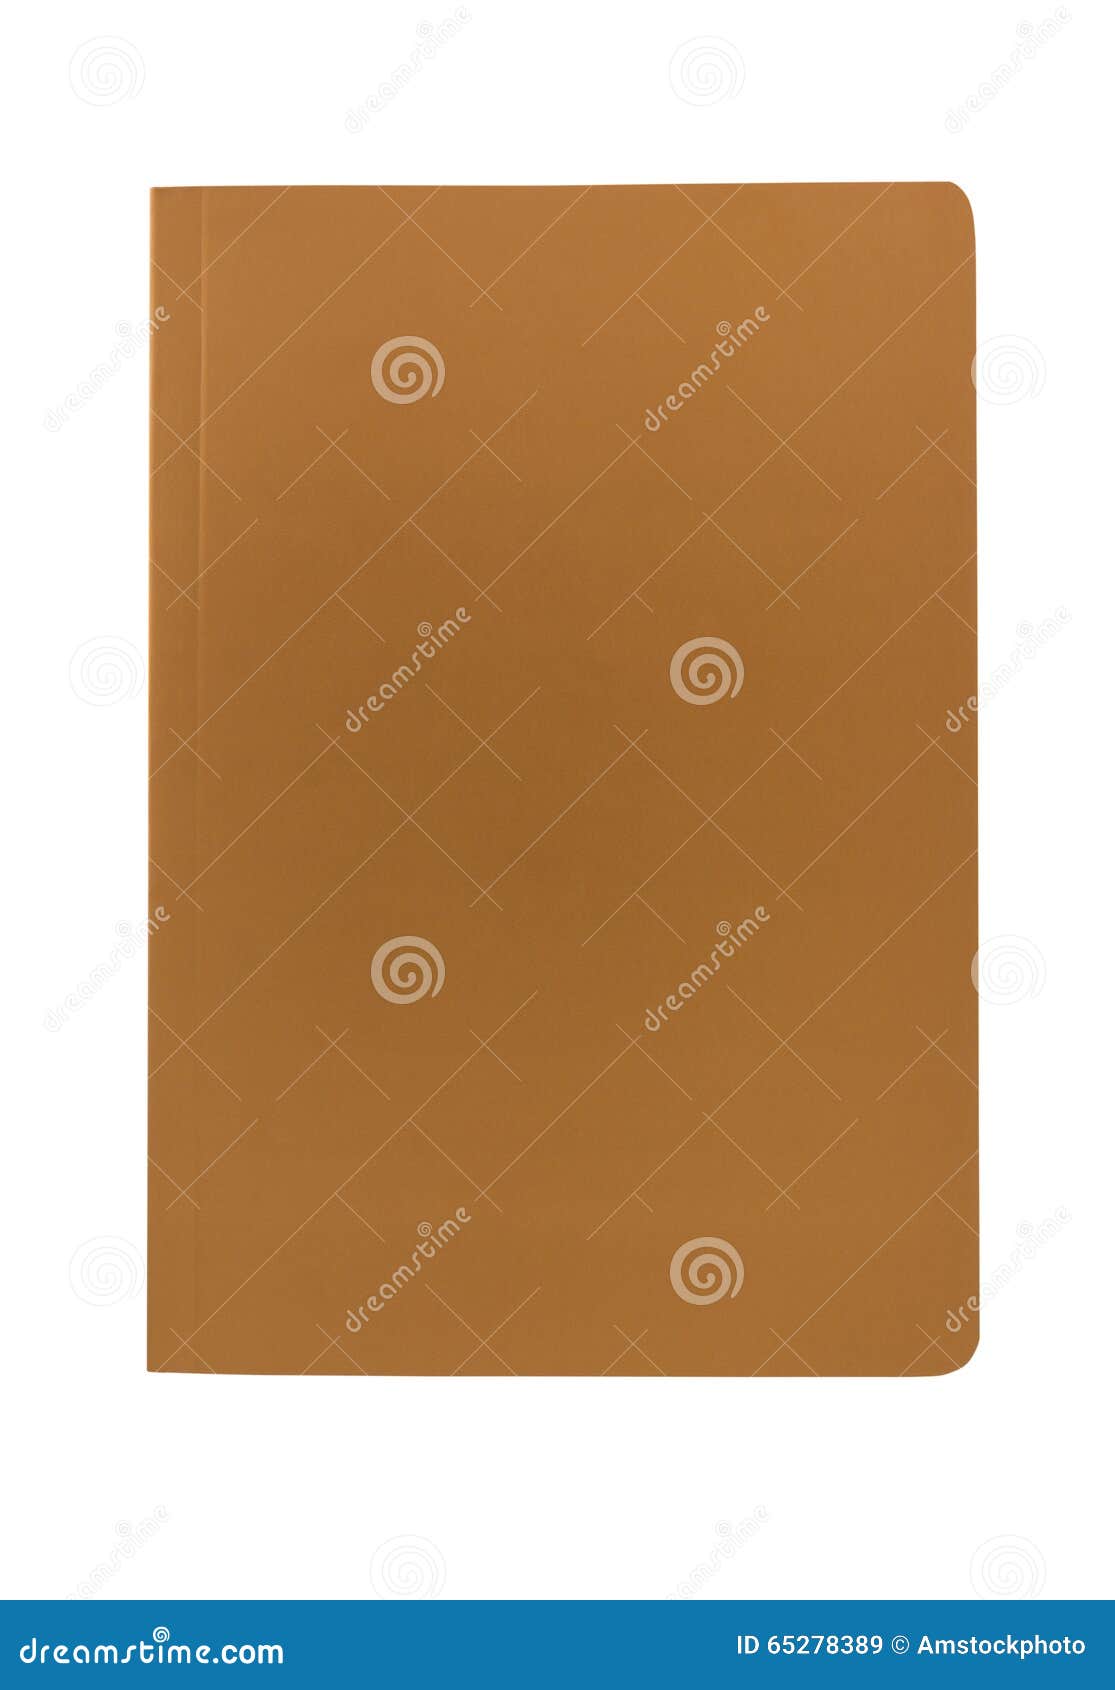 Blank Brown Paperback Book Cover Isolated On White Background Stock